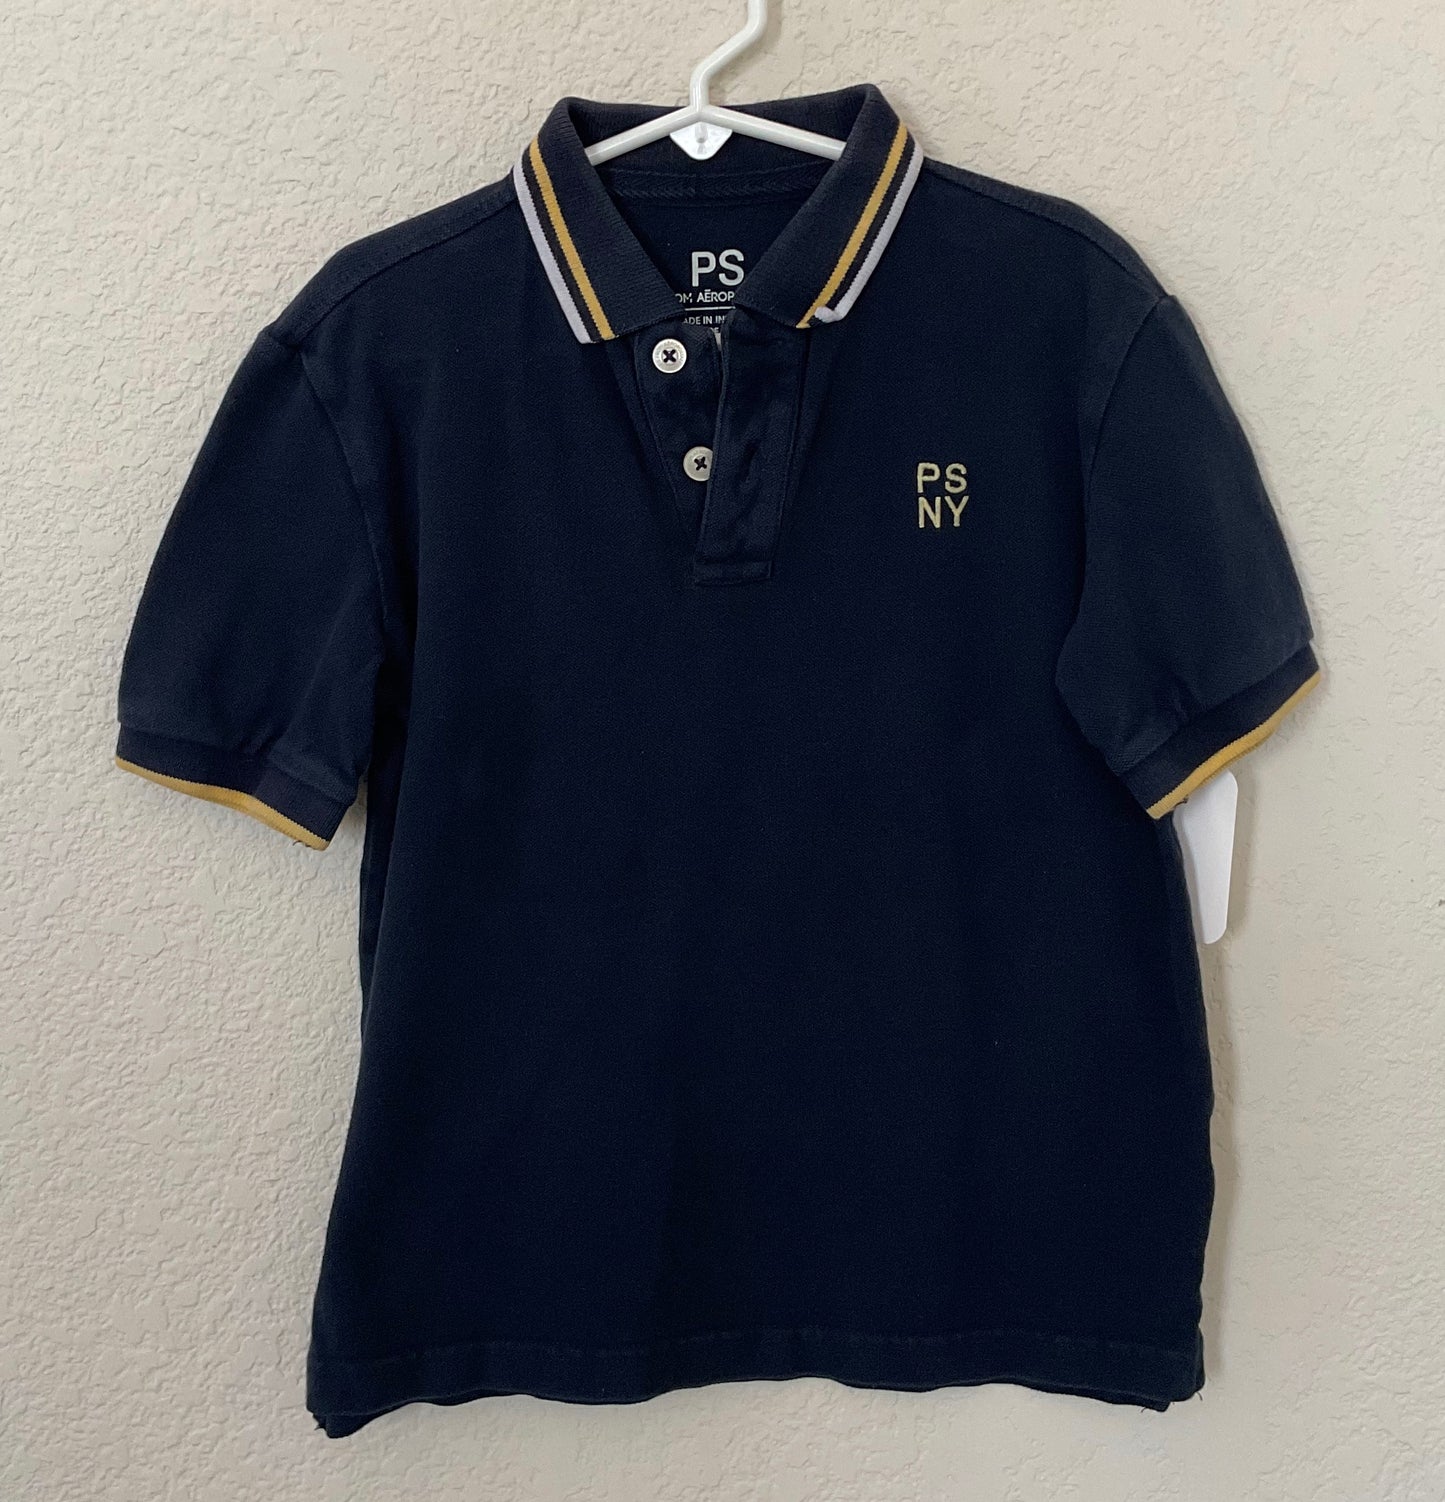 PS From Aeropostale Polo Children’s Shirt Size 6.